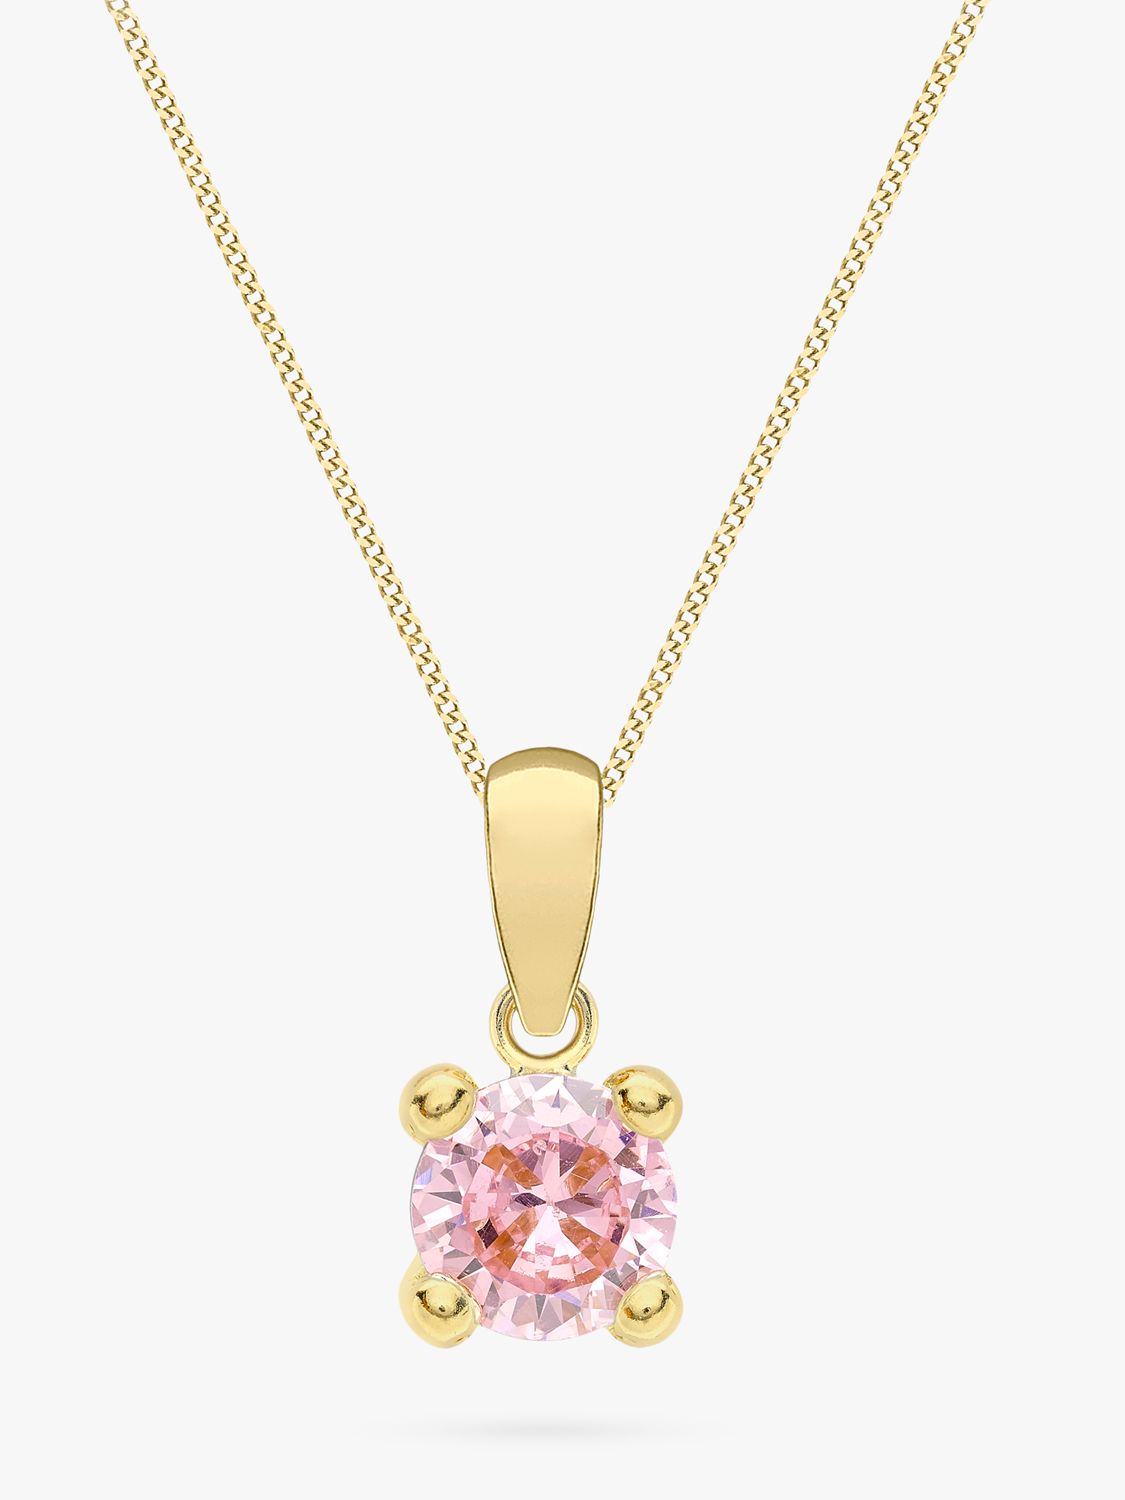 Star Blossom pendant, pink gold and diamonds - Luxury Pink